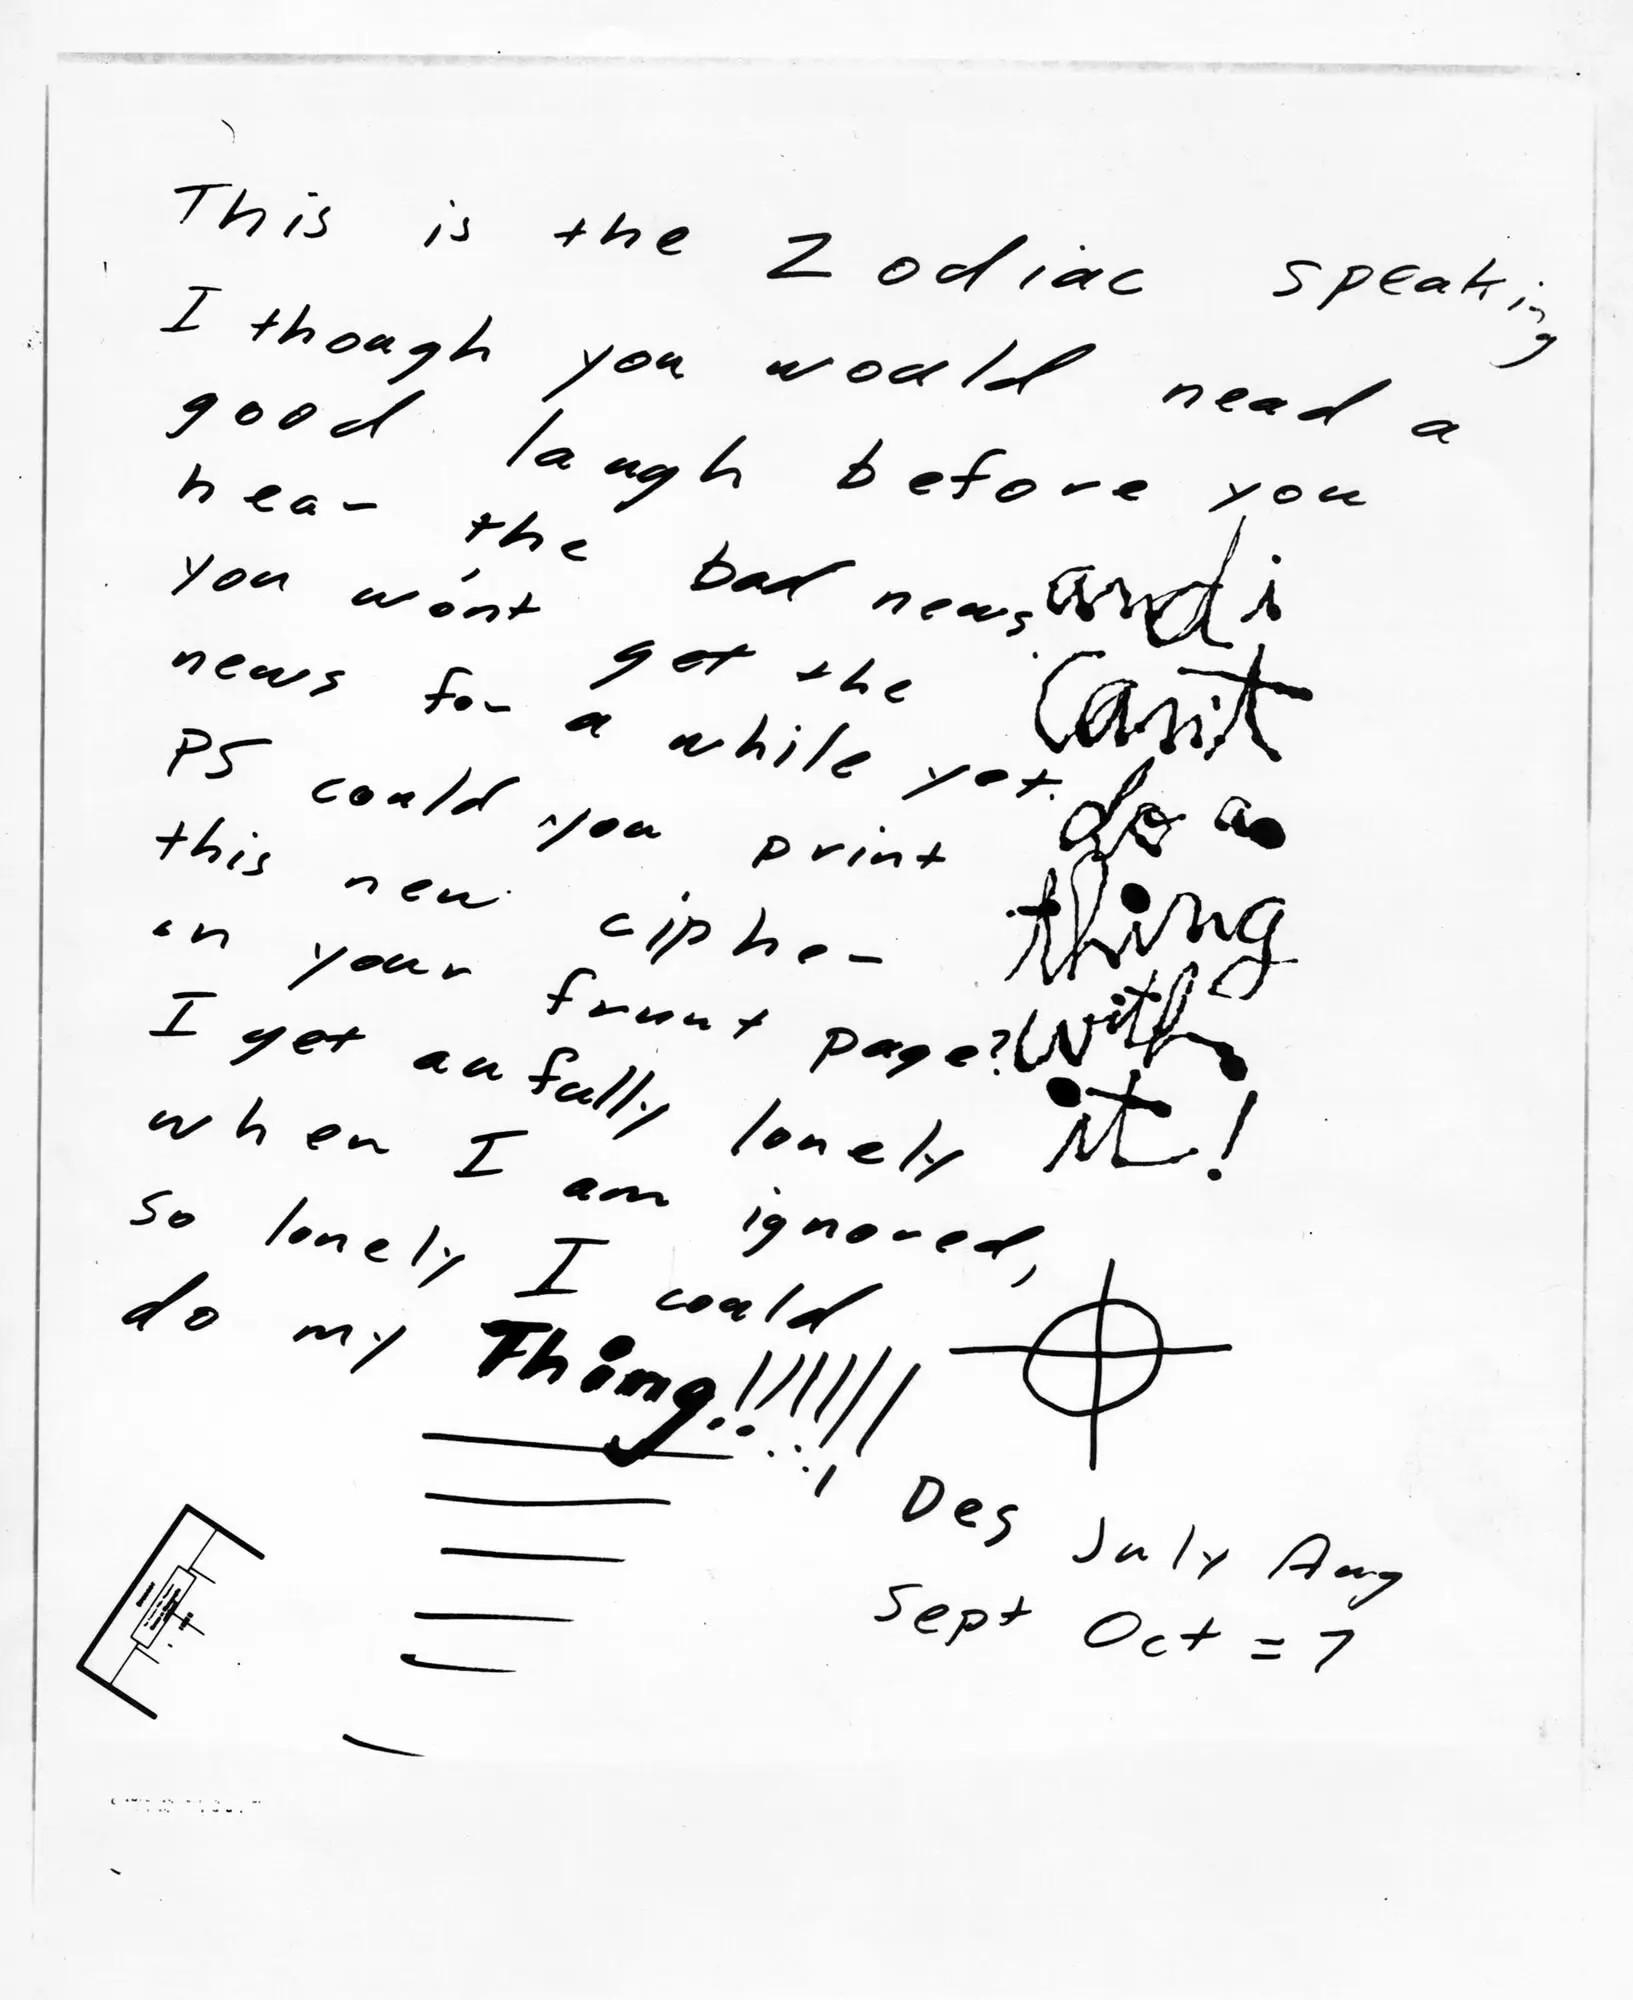 One of the letters the Zodiac Killer sent.